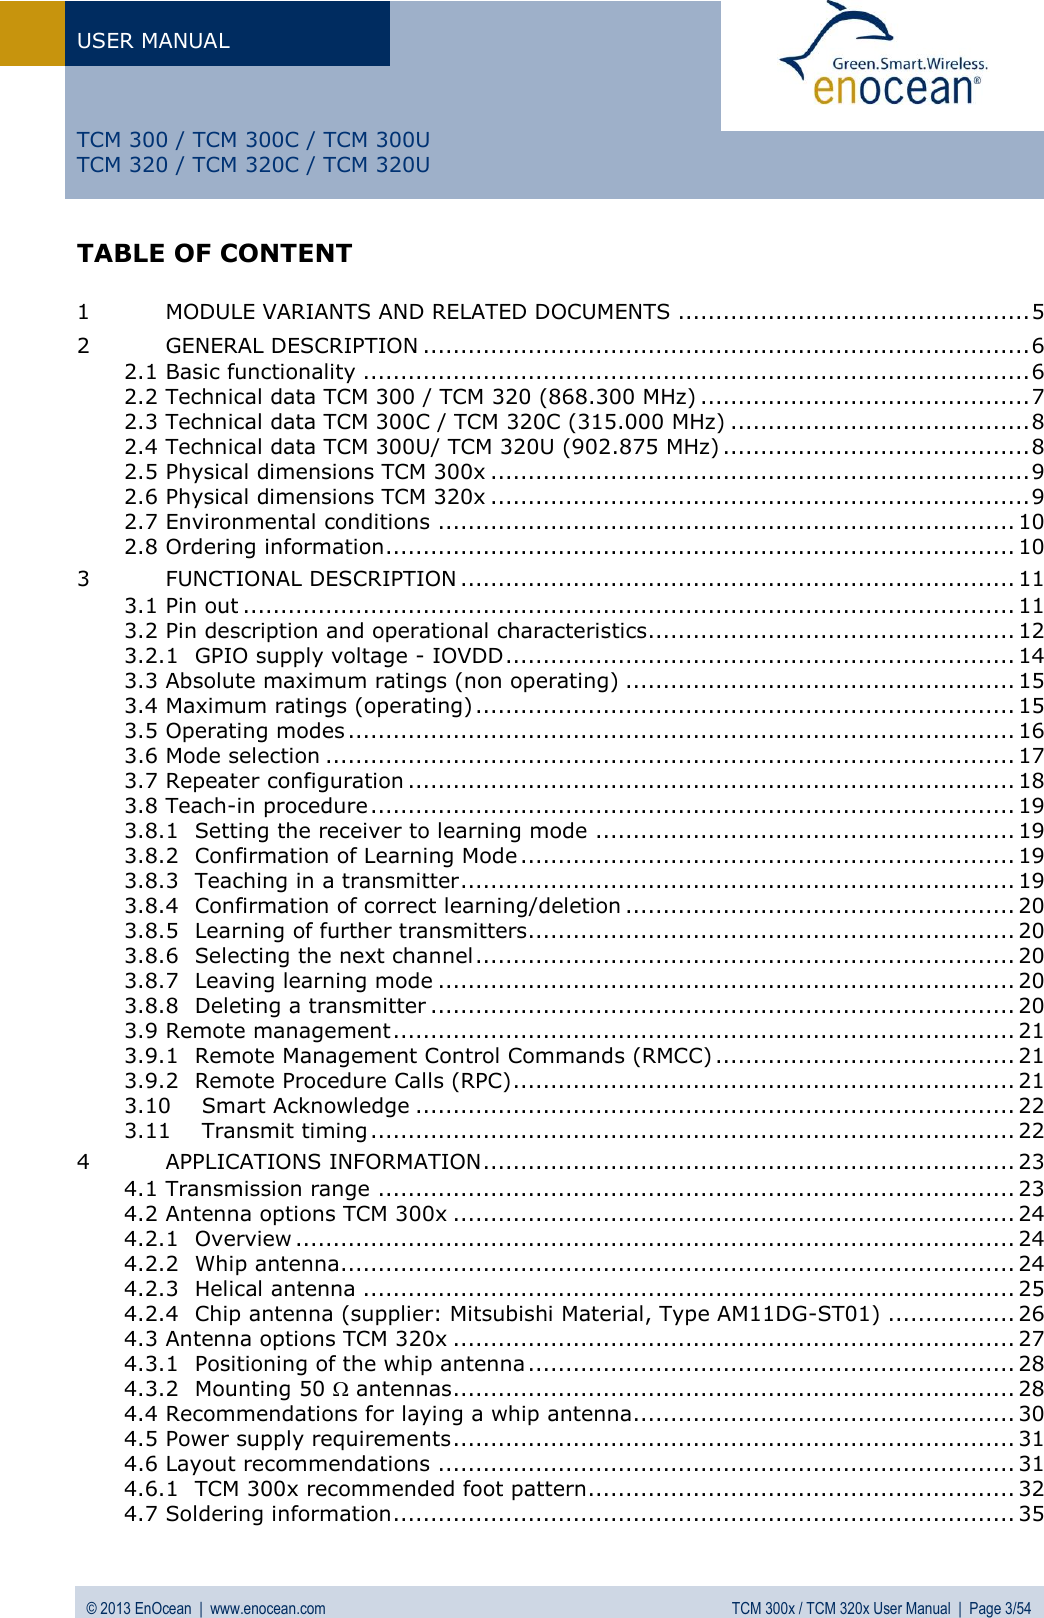 USER MANUAL   © 2013 EnOcean  |  www.enocean.com  TCM 300x / TCM 320x User Manual  |  Page 3/54   TCM 300 / TCM 300C / TCM 300U TCM 320 / TCM 320C / TCM 320U TABLE OF CONTENT  1 MODULE VARIANTS AND RELATED DOCUMENTS ............................................... 5 2 GENERAL DESCRIPTION ................................................................................. 6 2.1 Basic functionality ......................................................................................... 6 2.2 Technical data TCM 300 / TCM 320 (868.300 MHz) ............................................ 7 2.3 Technical data TCM 300C / TCM 320C (315.000 MHz) ........................................ 8 2.4 Technical data TCM 300U/ TCM 320U (902.875 MHz) ......................................... 8 2.5 Physical dimensions TCM 300x ........................................................................ 9 2.6 Physical dimensions TCM 320x ........................................................................ 9 2.7 Environmental conditions ............................................................................. 10 2.8 Ordering information .................................................................................... 10 3 FUNCTIONAL DESCRIPTION .......................................................................... 11 3.1 Pin out ....................................................................................................... 11 3.2 Pin description and operational characteristics ................................................. 12 3.2.1 GPIO supply voltage - IOVDD .................................................................... 14 3.3 Absolute maximum ratings (non operating) .................................................... 15 3.4 Maximum ratings (operating) ........................................................................ 15 3.5 Operating modes ......................................................................................... 16 3.6 Mode selection ............................................................................................ 17 3.7 Repeater configuration ................................................................................. 18 3.8 Teach-in procedure ...................................................................................... 19 3.8.1 Setting the receiver to learning mode ........................................................ 19 3.8.2 Confirmation of Learning Mode .................................................................. 19 3.8.3 Teaching in a transmitter .......................................................................... 19 3.8.4 Confirmation of correct learning/deletion .................................................... 20 3.8.5 Learning of further transmitters................................................................. 20 3.8.6 Selecting the next channel ........................................................................ 20 3.8.7 Leaving learning mode ............................................................................. 20 3.8.8 Deleting a transmitter .............................................................................. 20 3.9 Remote management ................................................................................... 21 3.9.1 Remote Management Control Commands (RMCC) ........................................ 21 3.9.2 Remote Procedure Calls (RPC) ................................................................... 21 3.10 Smart Acknowledge ................................................................................ 22 3.11 Transmit timing ...................................................................................... 22 4 APPLICATIONS INFORMATION ....................................................................... 23 4.1 Transmission range ..................................................................................... 23 4.2 Antenna options TCM 300x ........................................................................... 24 4.2.1 Overview ................................................................................................ 24 4.2.2 Whip antenna .......................................................................................... 24 4.2.3 Helical antenna ....................................................................................... 25 4.2.4 Chip antenna (supplier: Mitsubishi Material, Type AM11DG-ST01) ................. 26 4.3 Antenna options TCM 320x ........................................................................... 27 4.3.1 Positioning of the whip antenna ................................................................. 28 4.3.2 Mounting 50  antennas ........................................................................... 28 4.4 Recommendations for laying a whip antenna................................................... 30 4.5 Power supply requirements ........................................................................... 31 4.6 Layout recommendations ............................................................................. 31 4.6.1 TCM 300x recommended foot pattern......................................................... 32 4.7 Soldering information ................................................................................... 35 